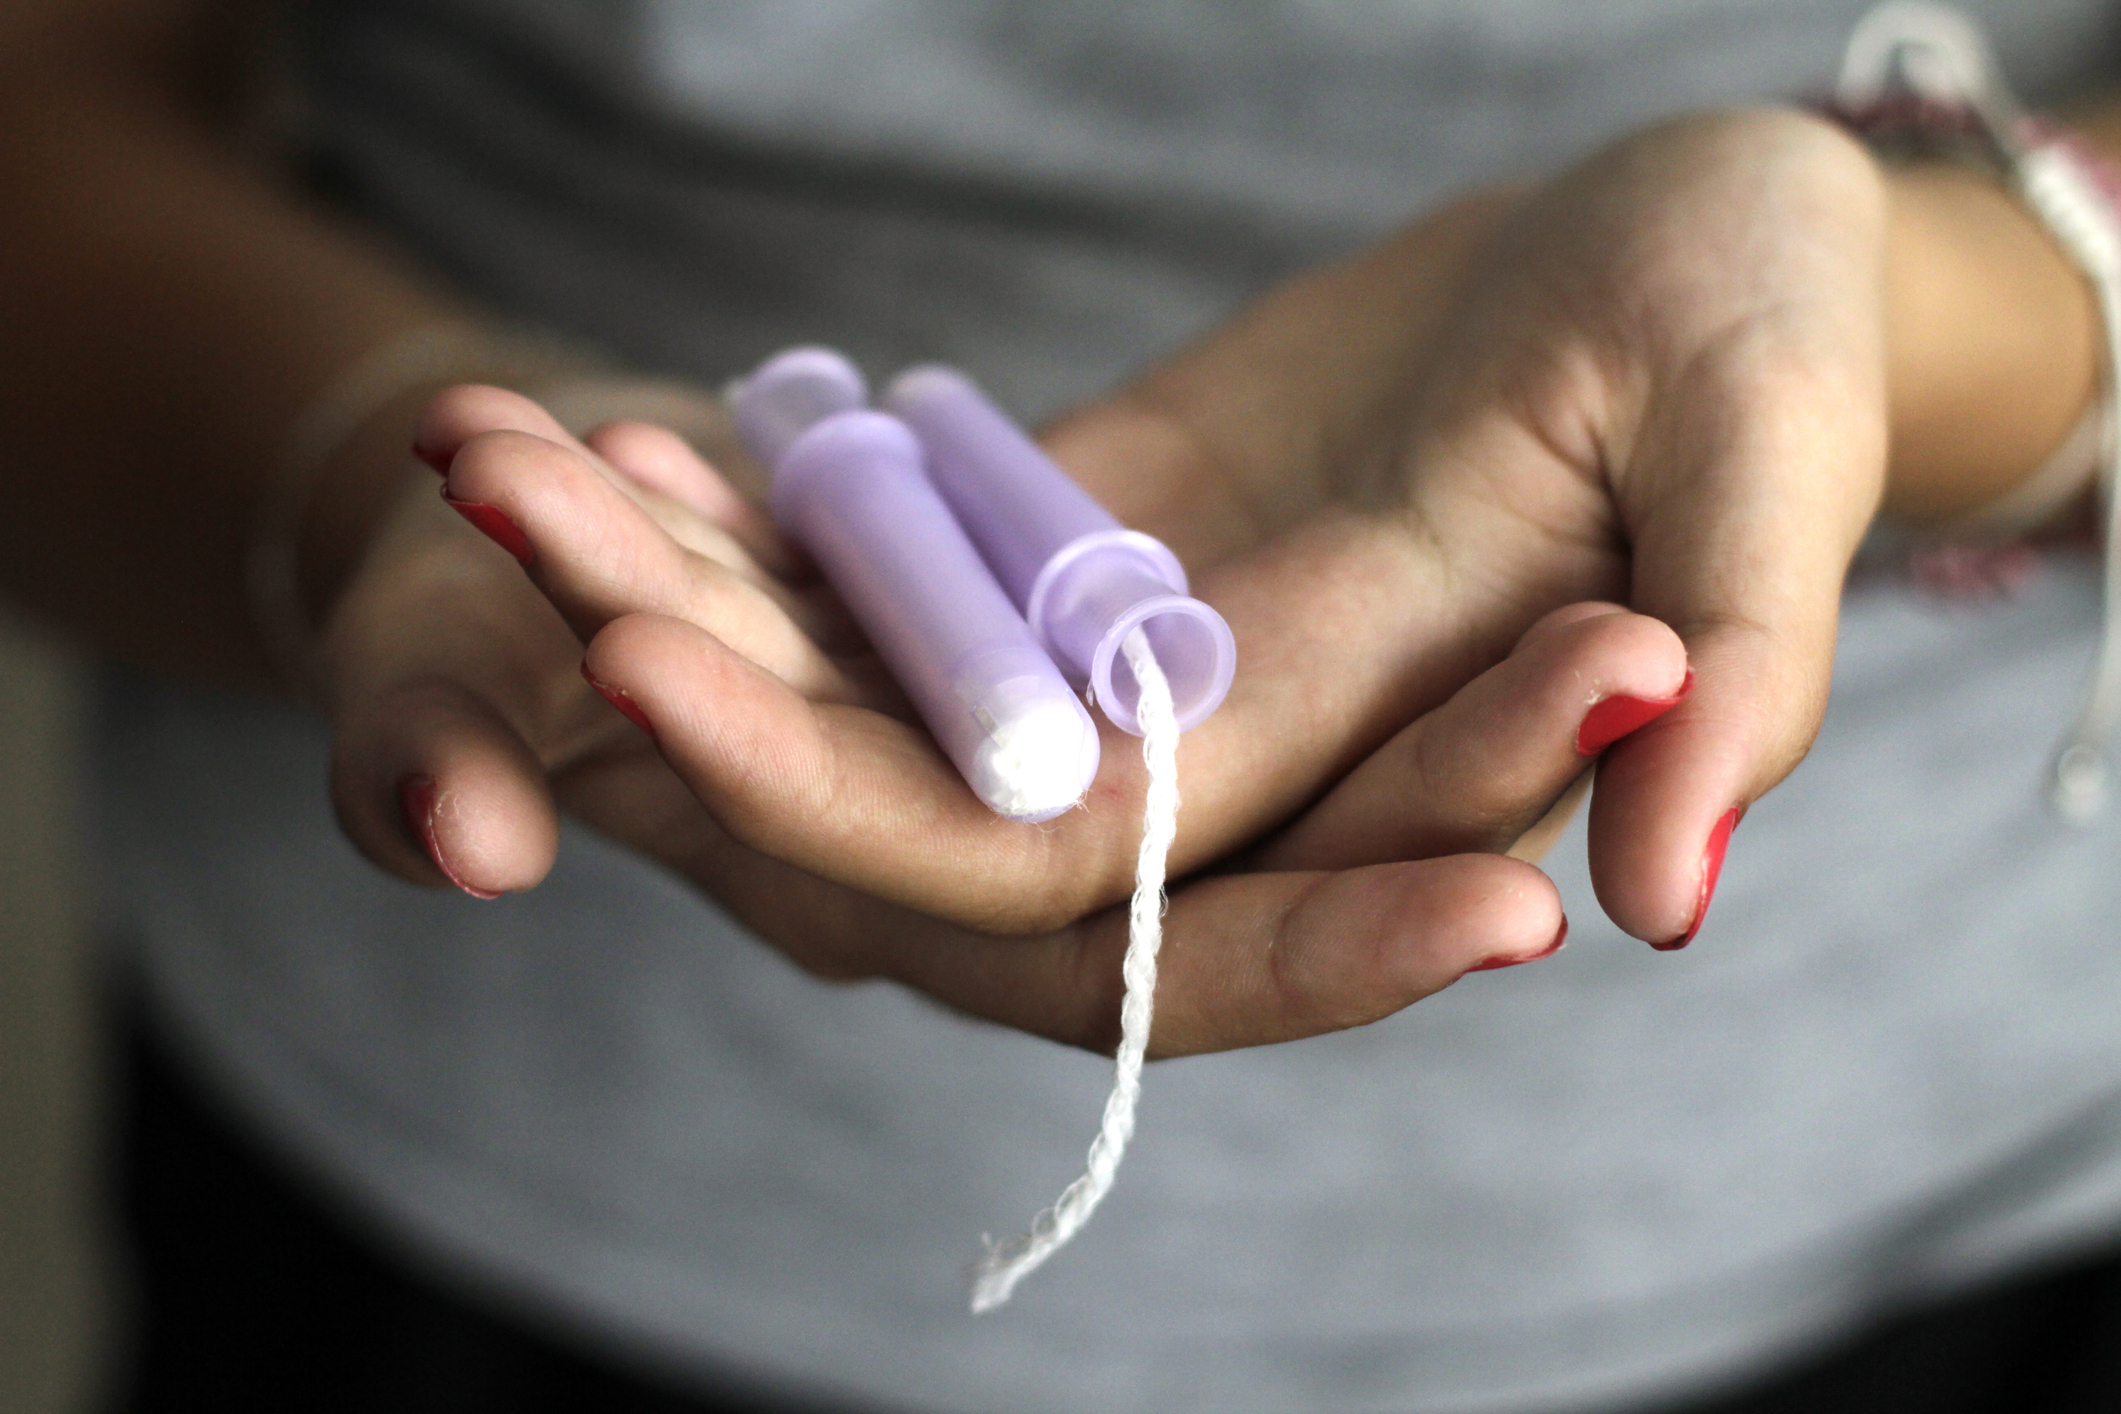 Person holding several tampons in hand